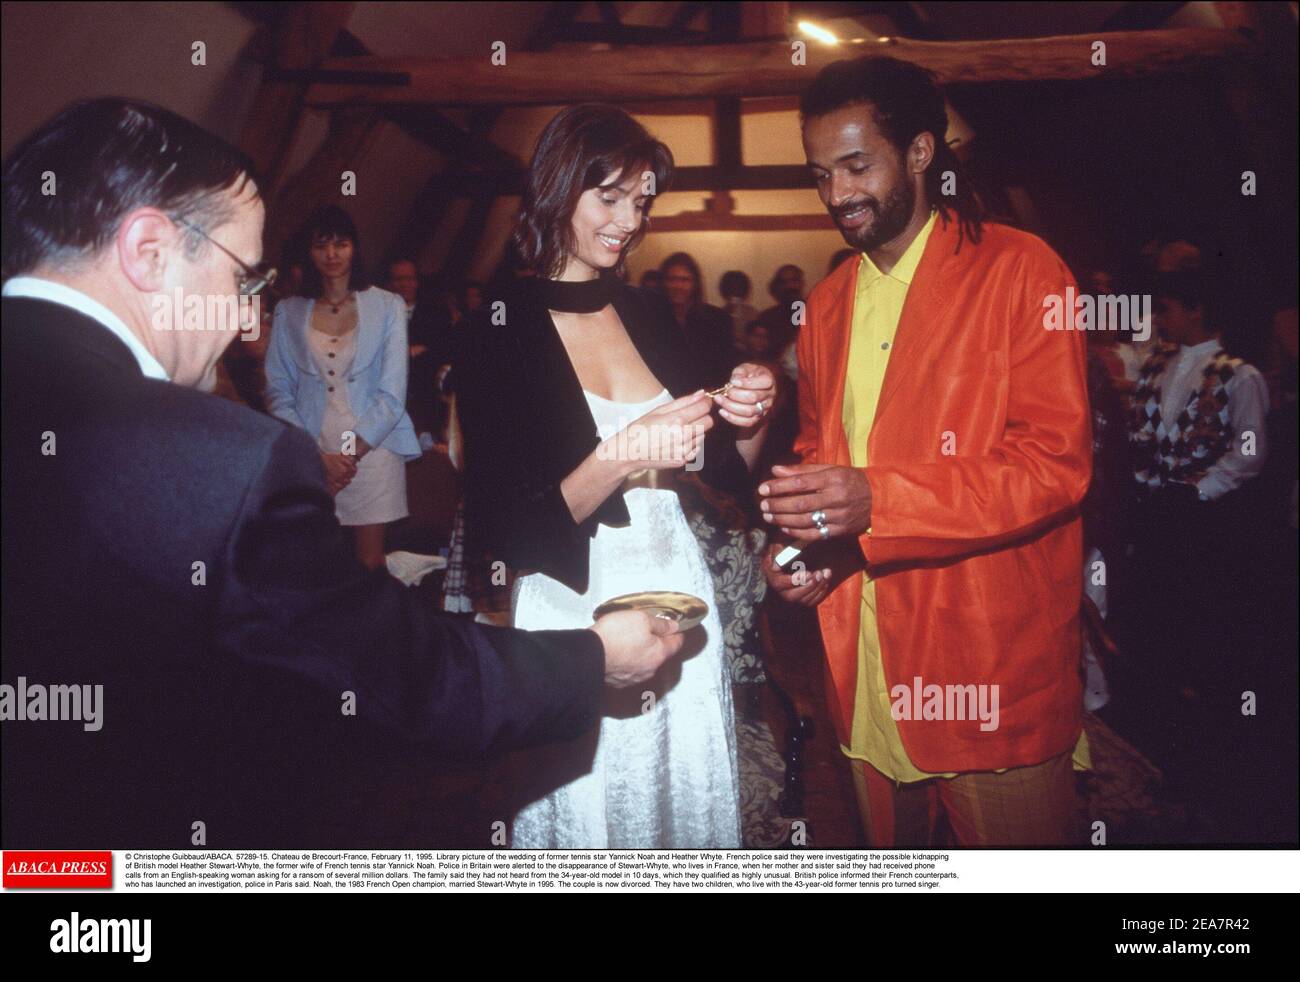 © Christophe Guibbaud/ABACA. 57289-15. Chateau de Brecourt-France, February 11, 1995. Library picture of the wedding of former tennis star Yannick Noah and Heather Whyte. French police said they were investigating the possible kidnapping of British model Heather Stewart-Whyte, the former wife of French tennis star Yannick Noah. Police in Britain were alerted to the disappearance of Stewart-Whyte, who lives in France, when her mother and sister said they had received phone calls from an English-speaking woman asking for a ransom of several million dollars. The family said they had not heard fro Stock Photo